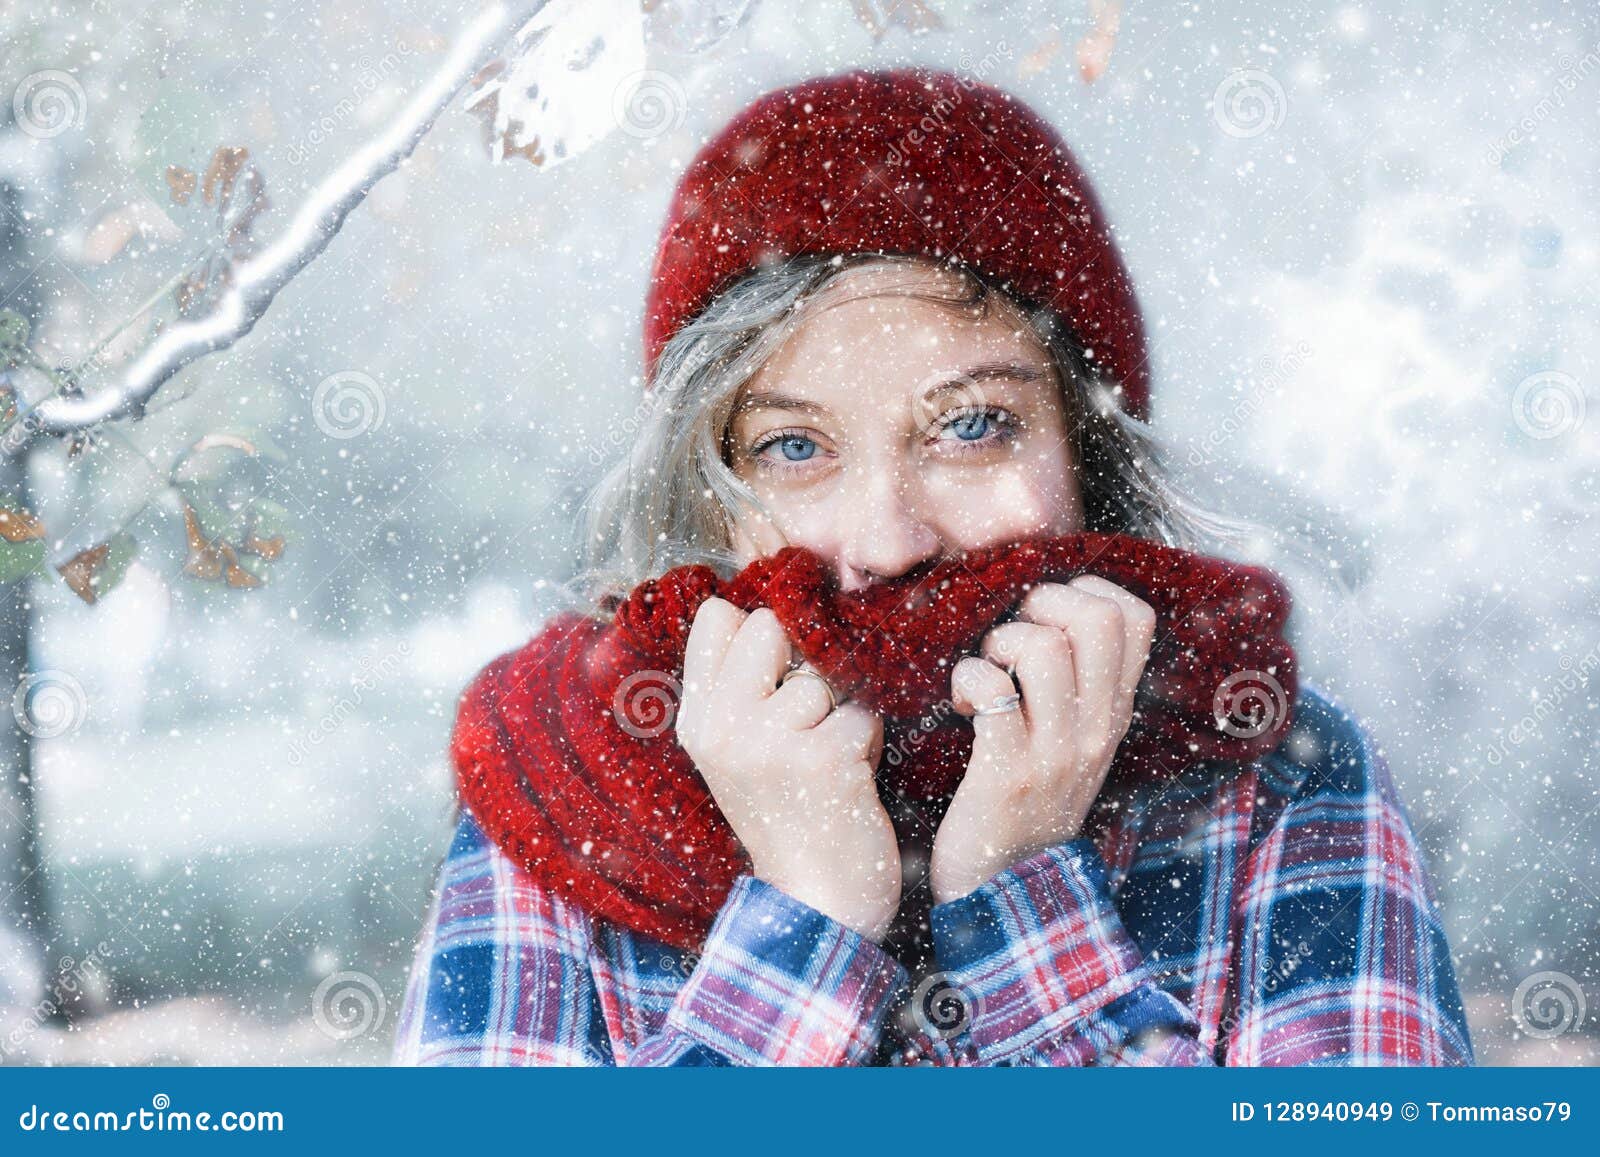 Girl during Cold Day Wearing Warm Clothes Outdoor Stock Image - Image ...